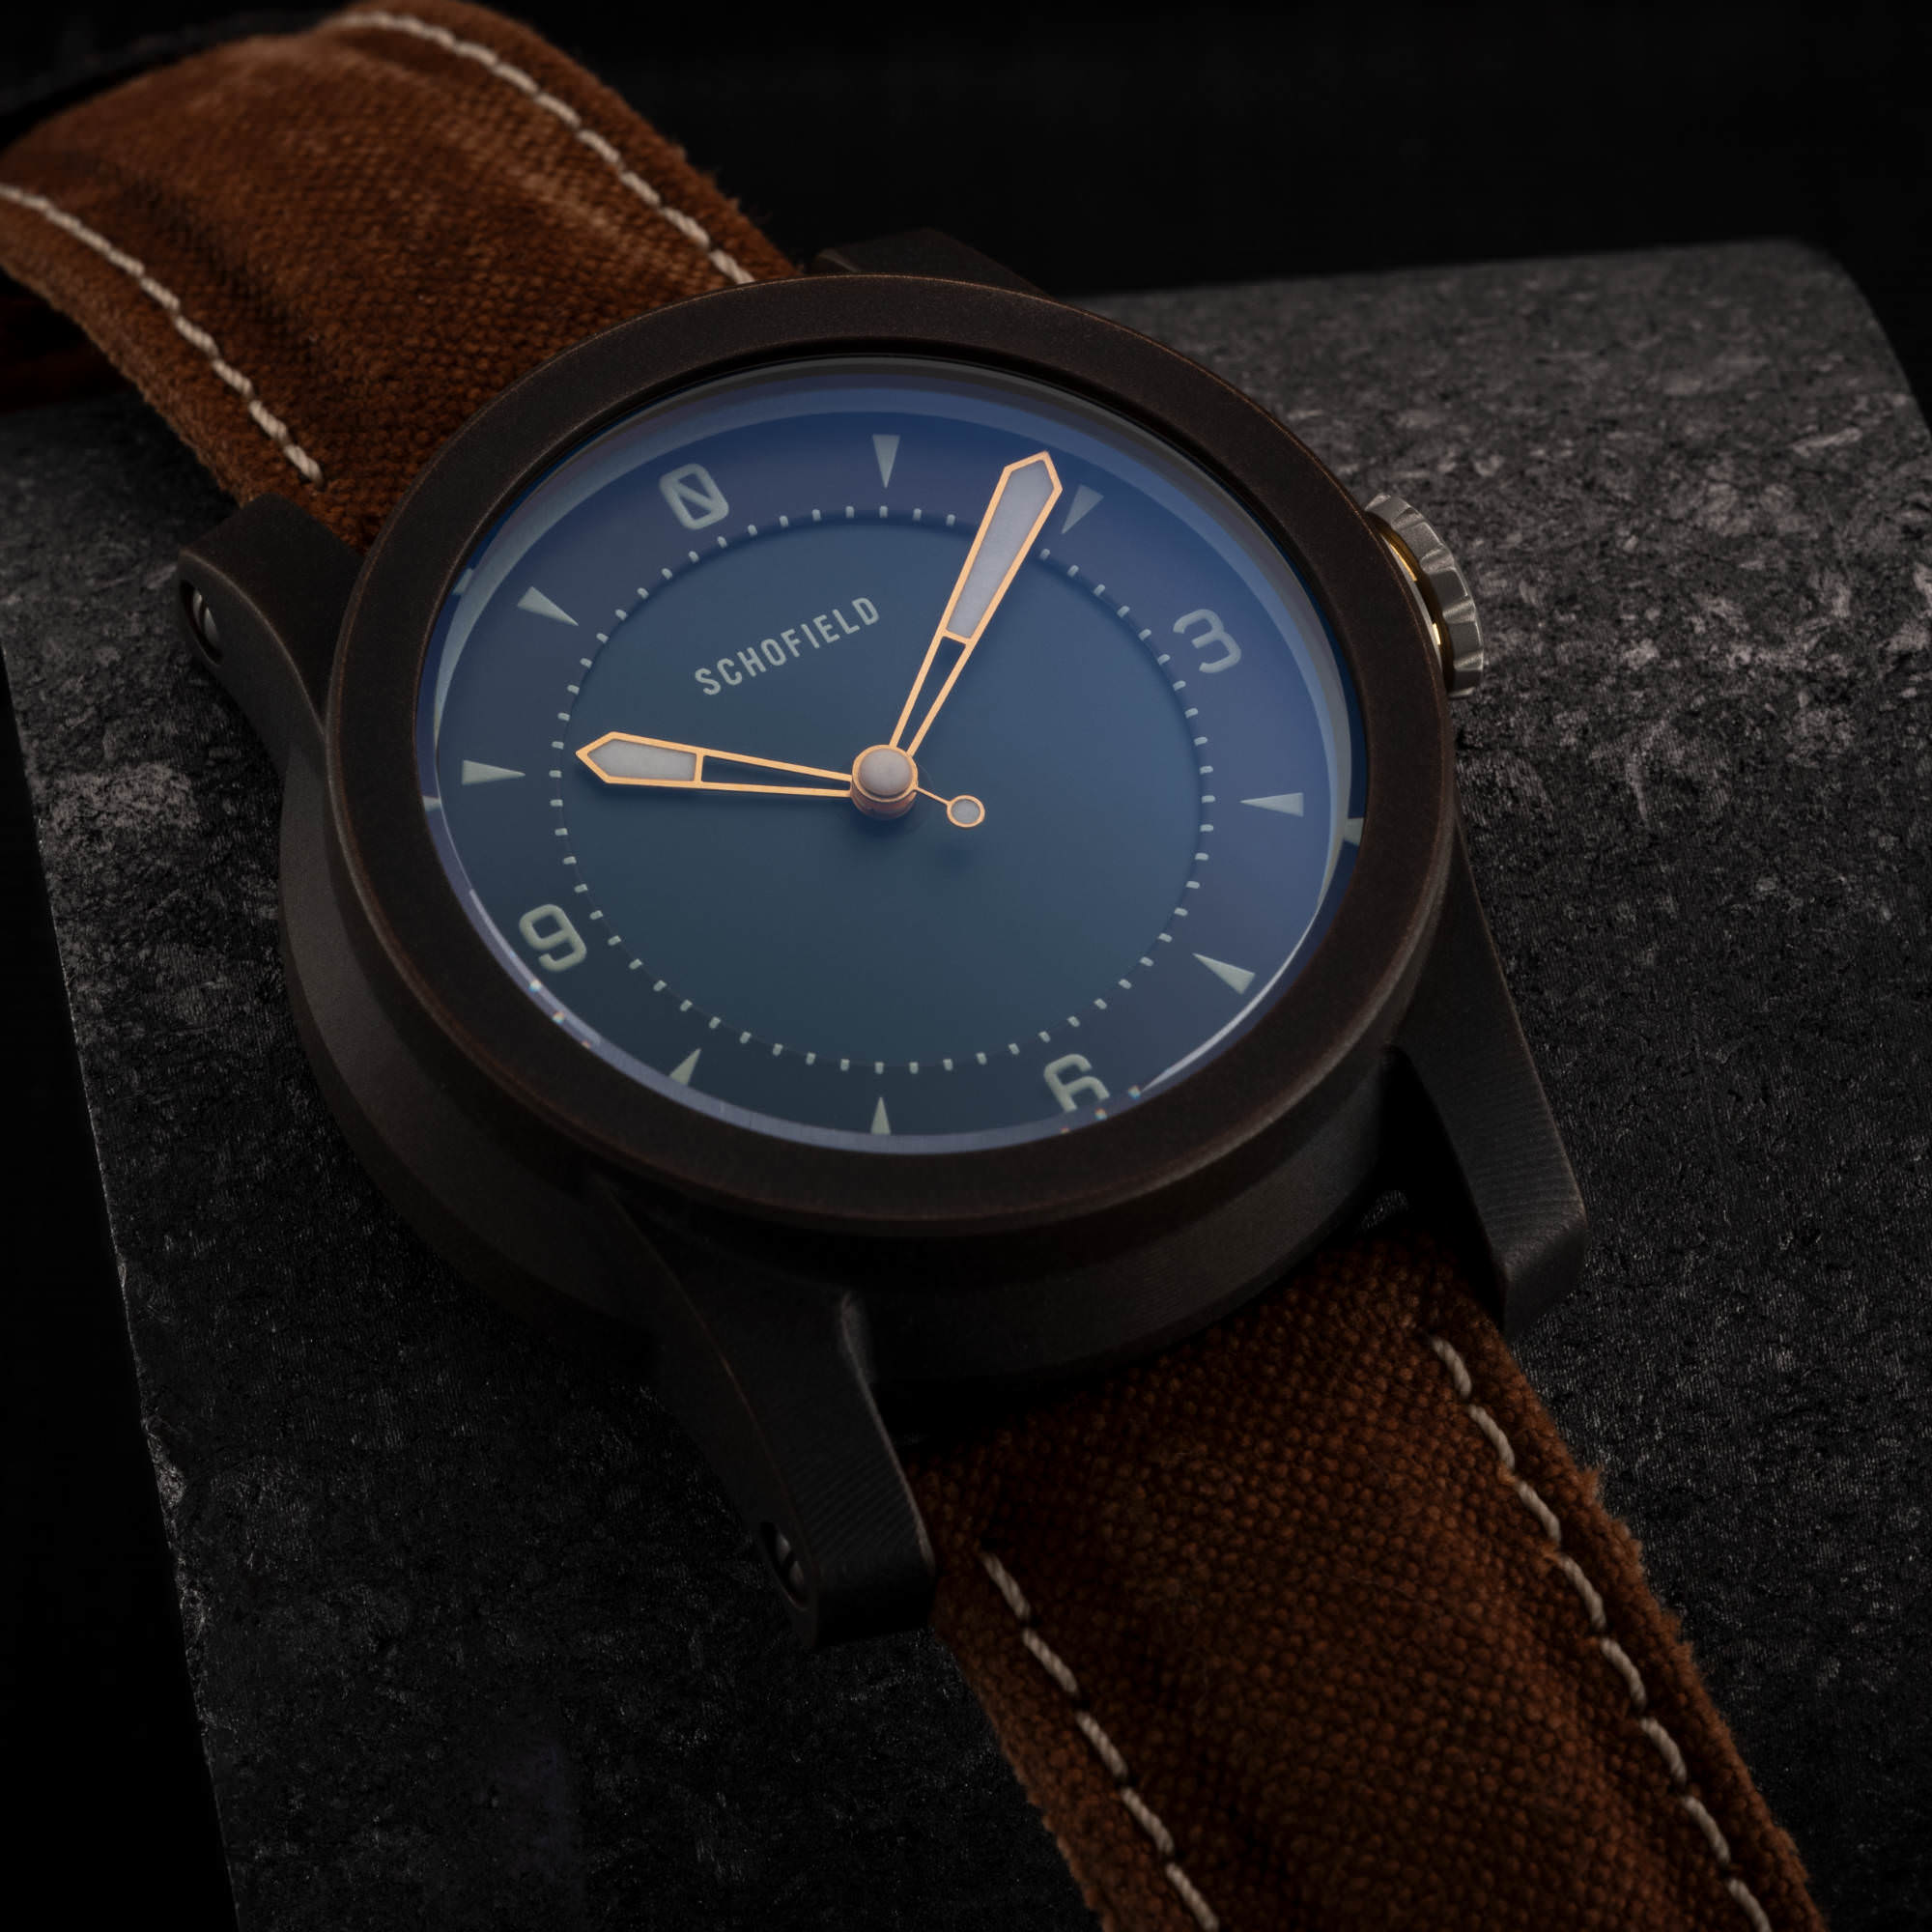 Japanese watch with indigo dial